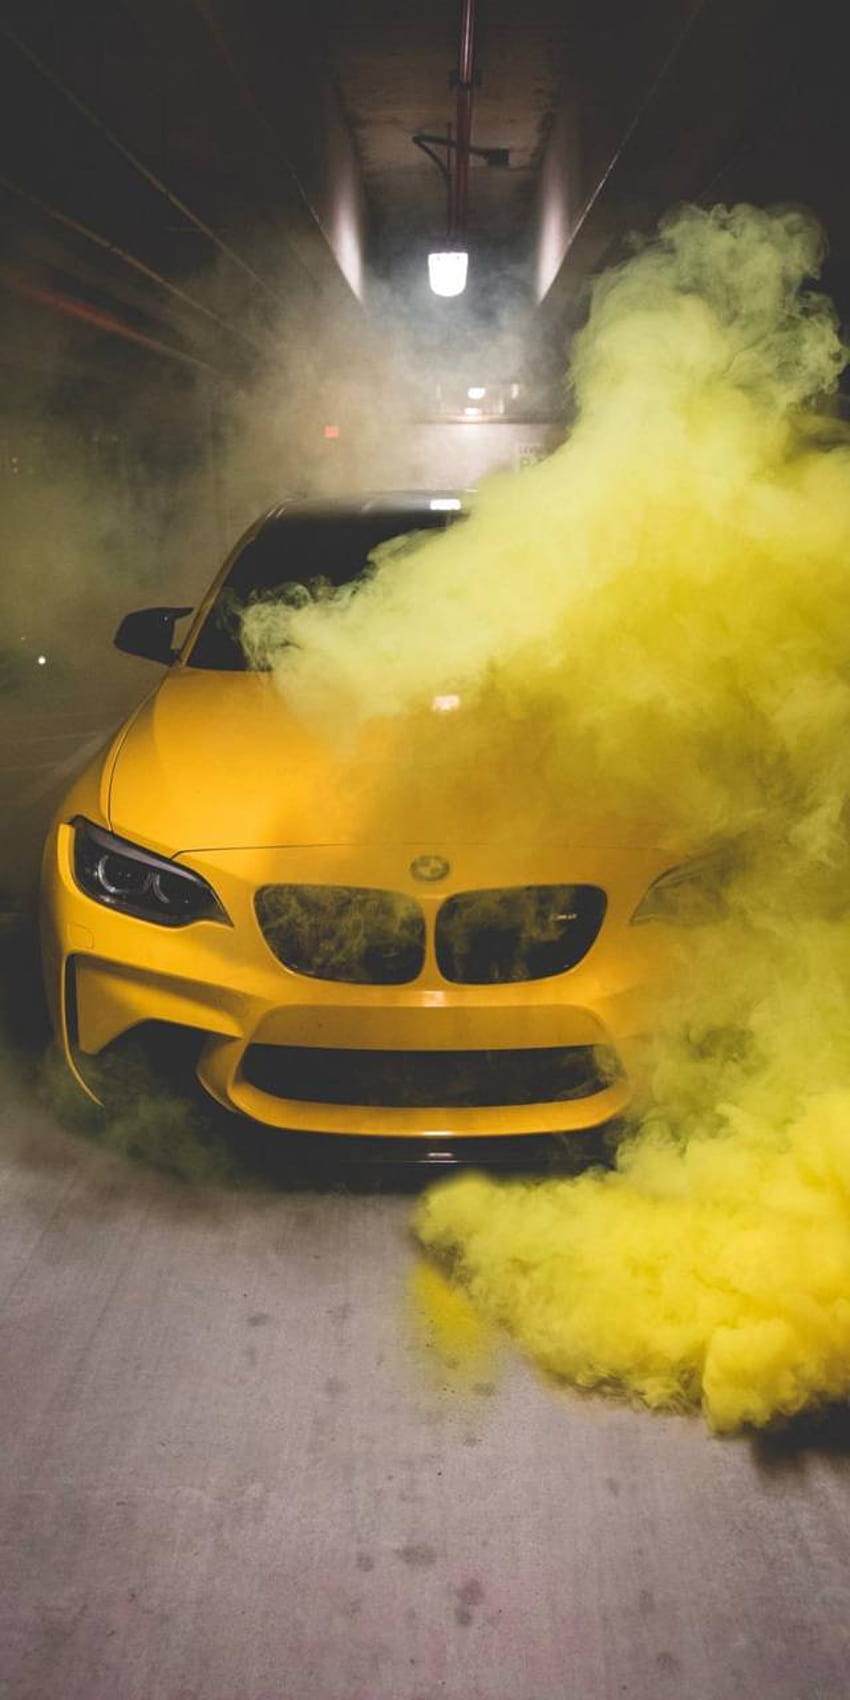 30000 Car Smoke Pictures  Download Free Images on Unsplash